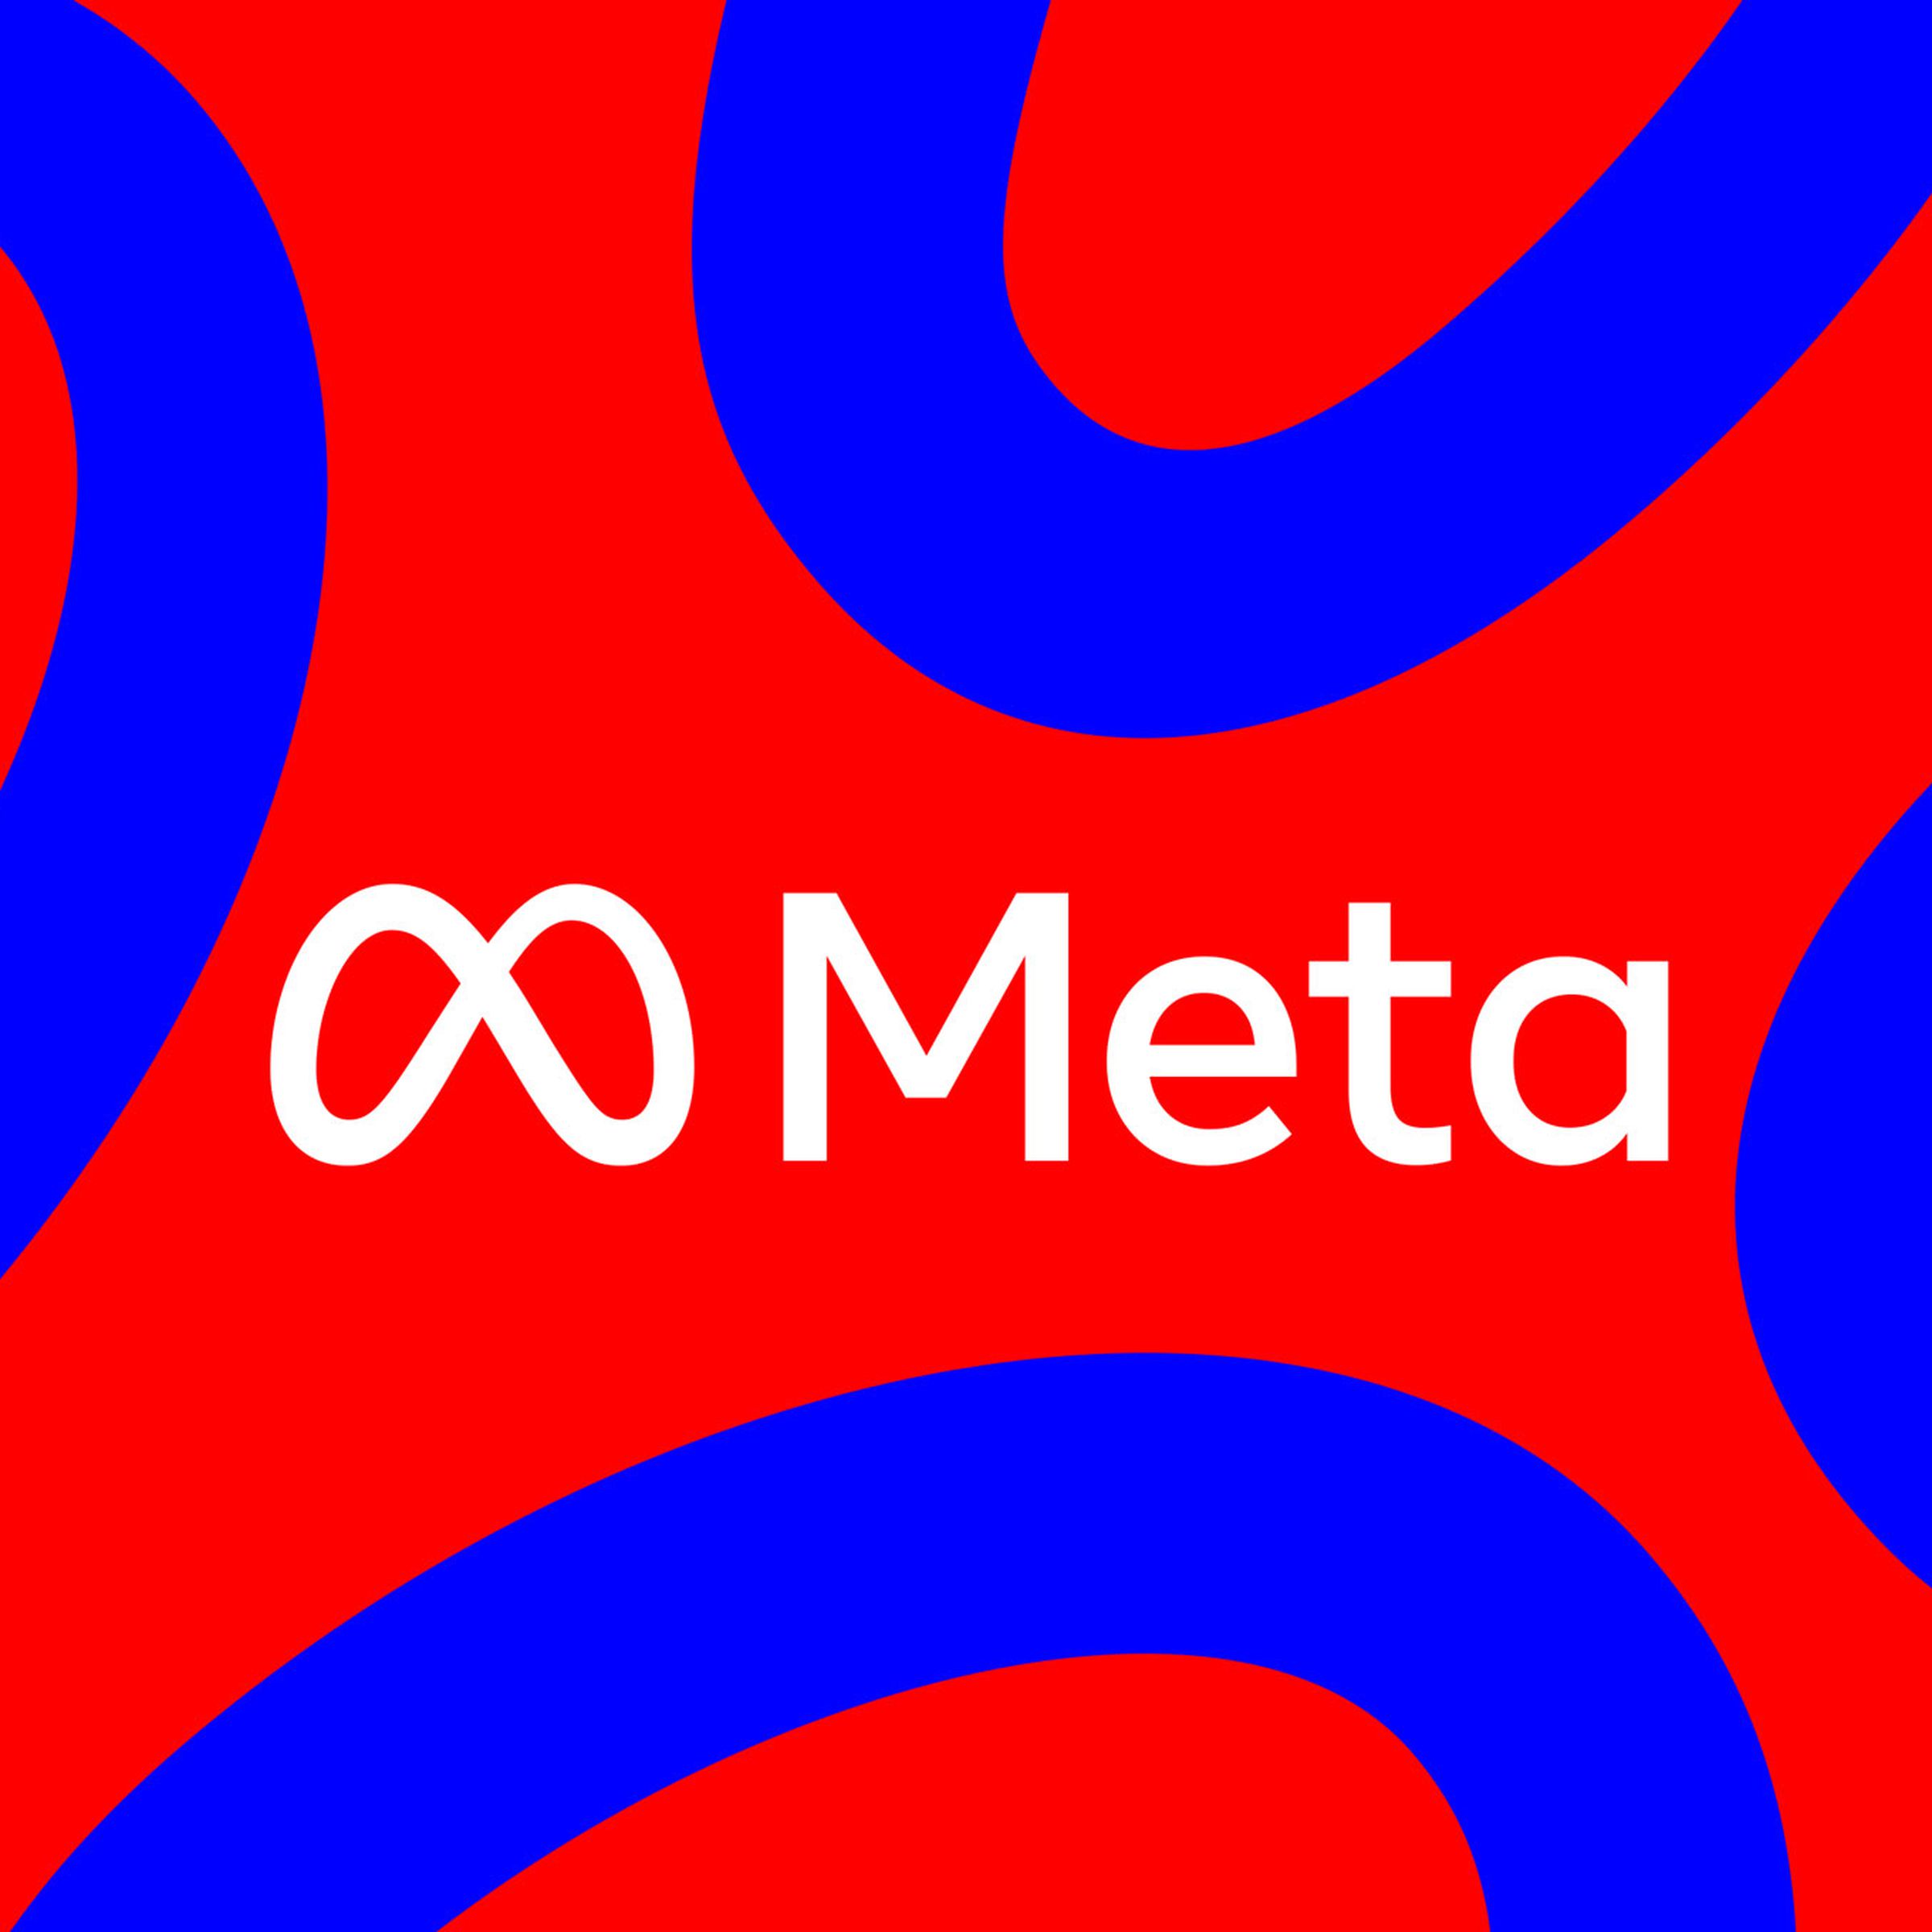 Image of Meta’s logo with a red and blue background.